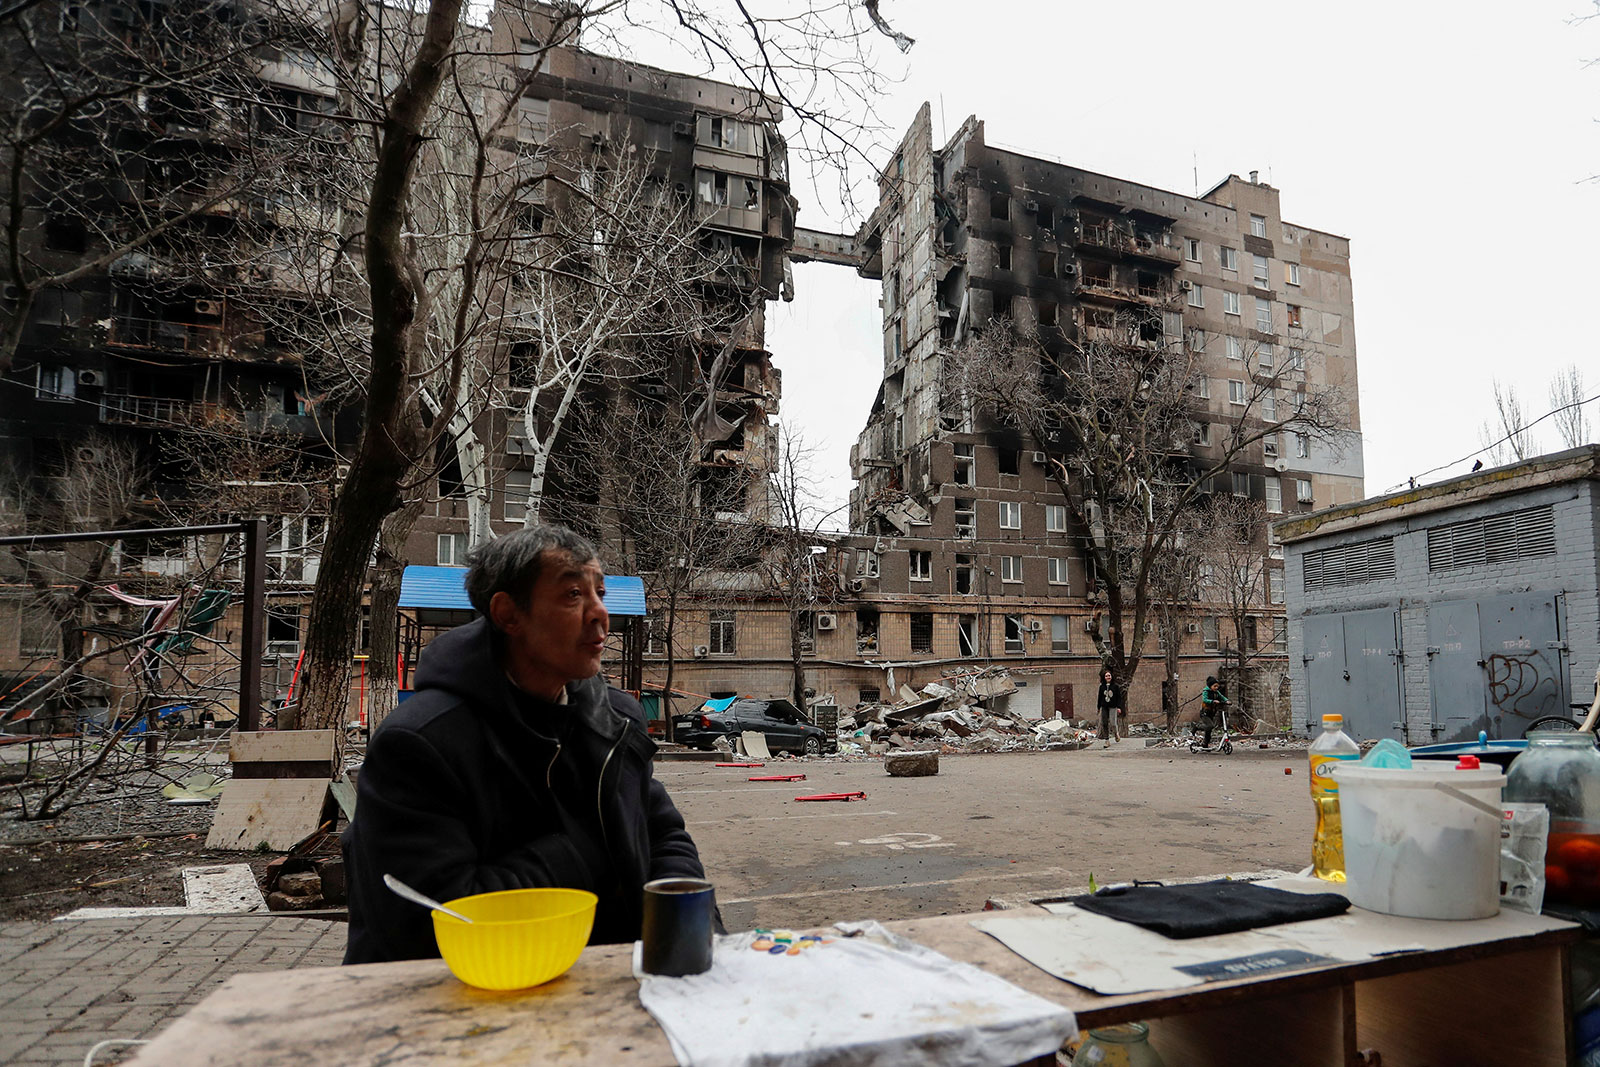 A local resident sits next to a fire in a courtyard outside a building damaged in Mariupol, Ukraine, on April 14.